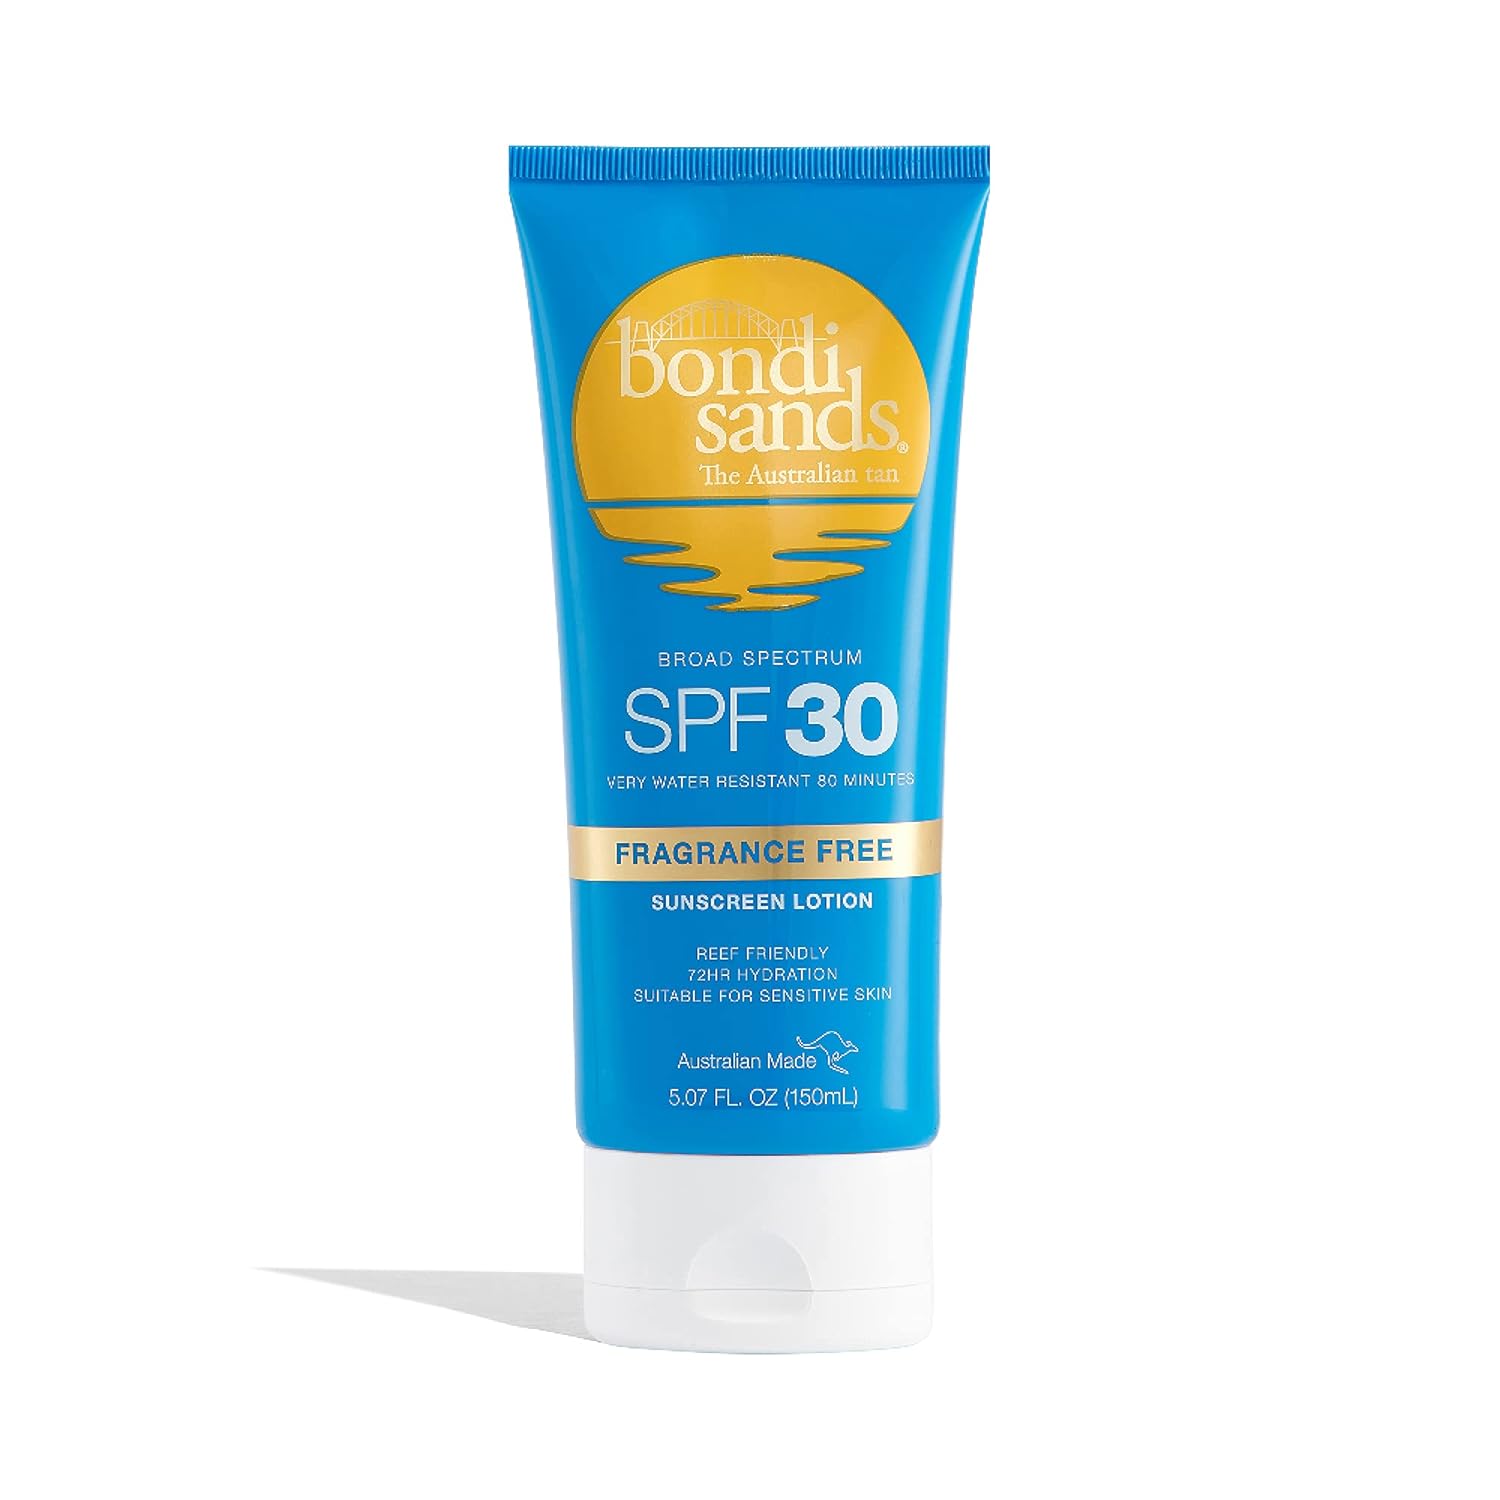 Bondi Sands Fragrance Free Sunscreen Body Lotion SPF 30 | Hydrating Broad Spectrum Protection, Sheer, Water Resistant, Reef Friendly* | 5.07 Oz/150 mL